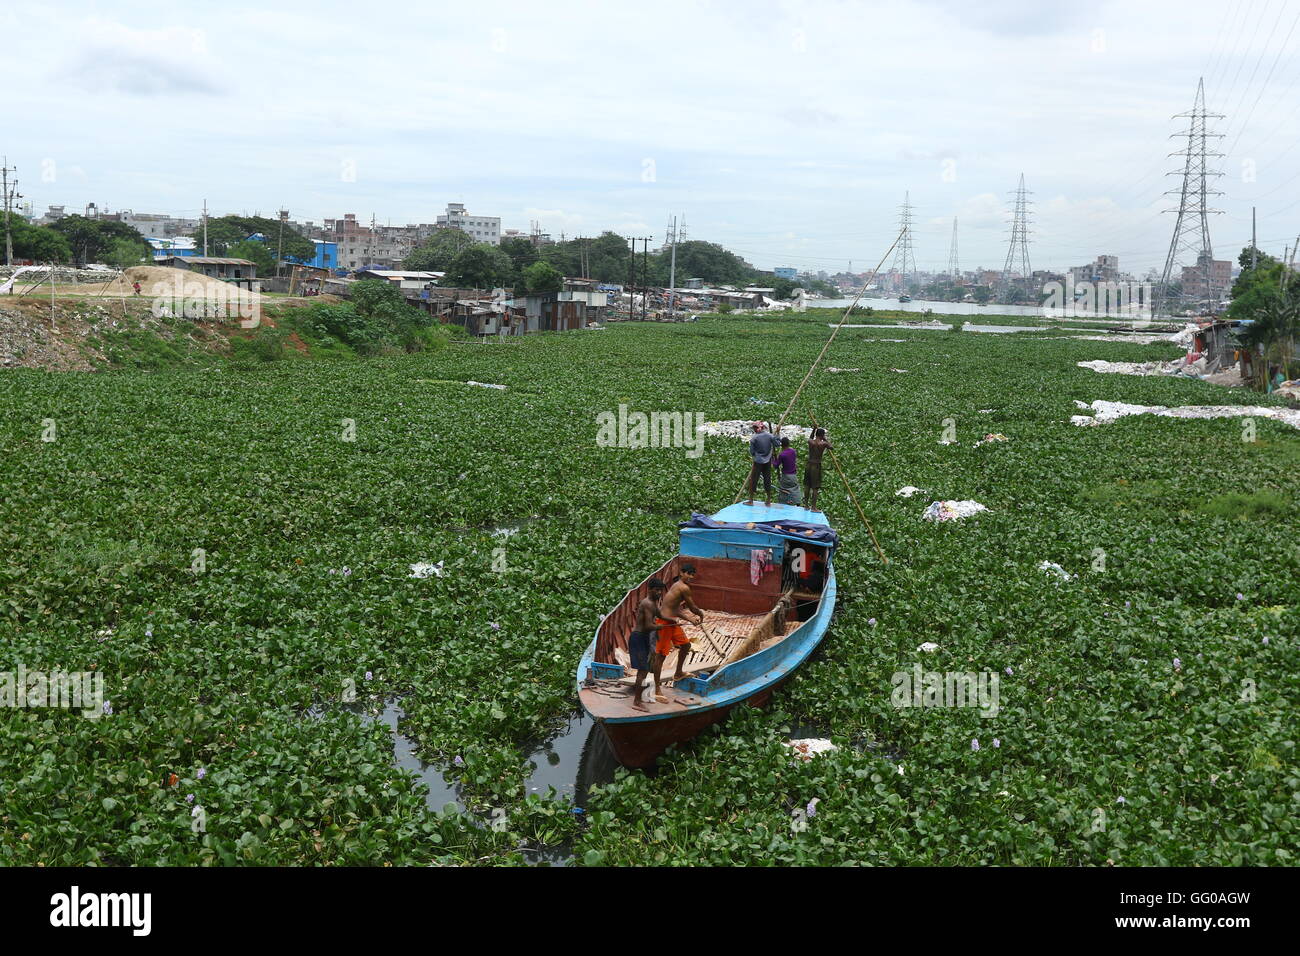 Dhaka 02 august 2016. Bangladeshi boat man struggles to make his way through a water hyacinth filled Buriganga River in Dhaka. The free floating aquatic plant is hampering the movement of boats in the river. Stock Photo